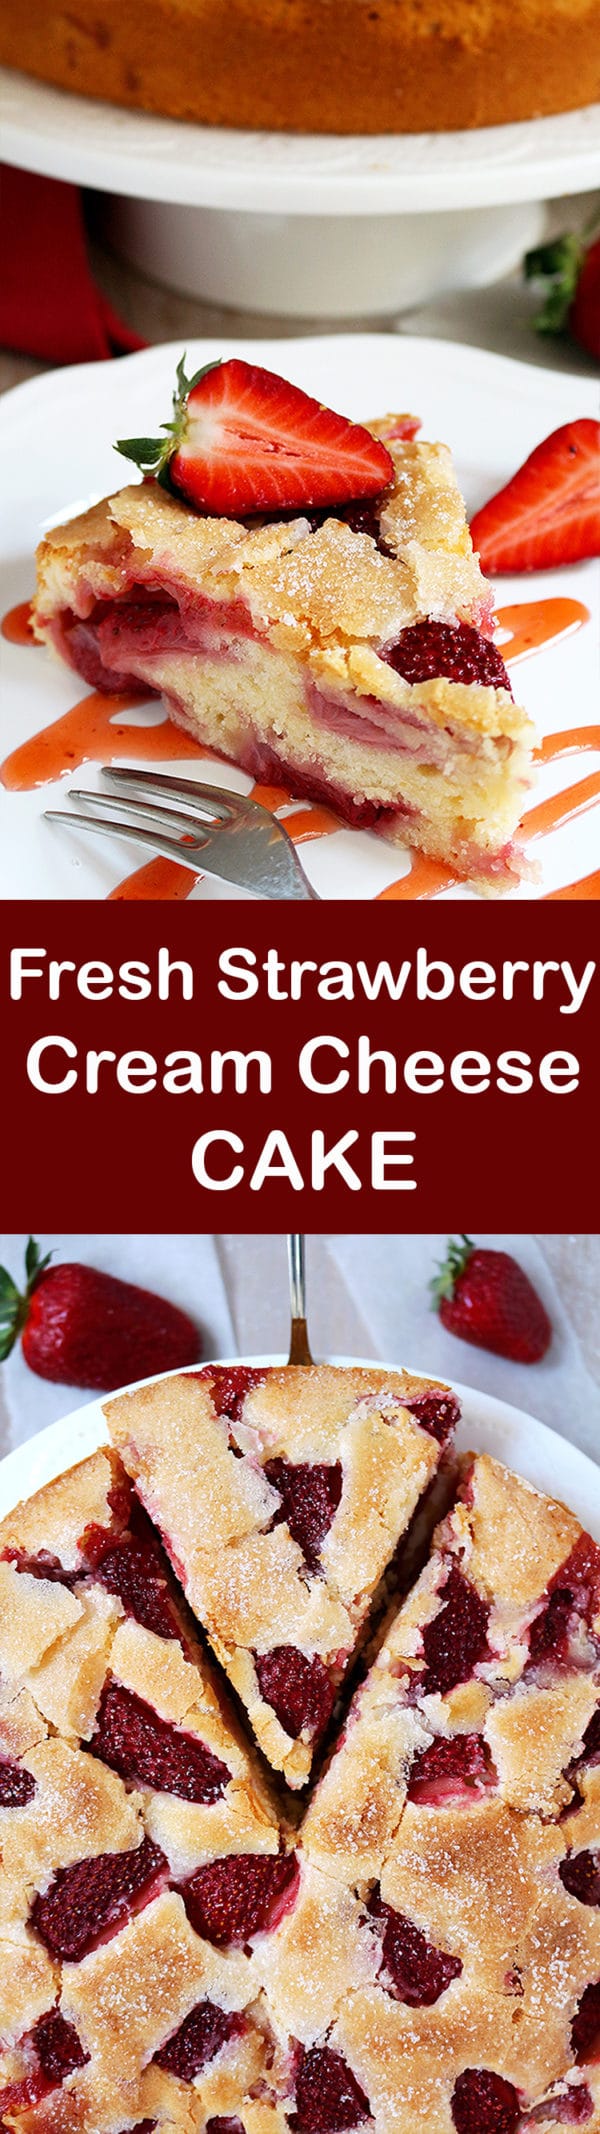 Fresh Strawberry Cream Cheese Cake is definitely one of my favorite cakes and it has a special place in my cookbook